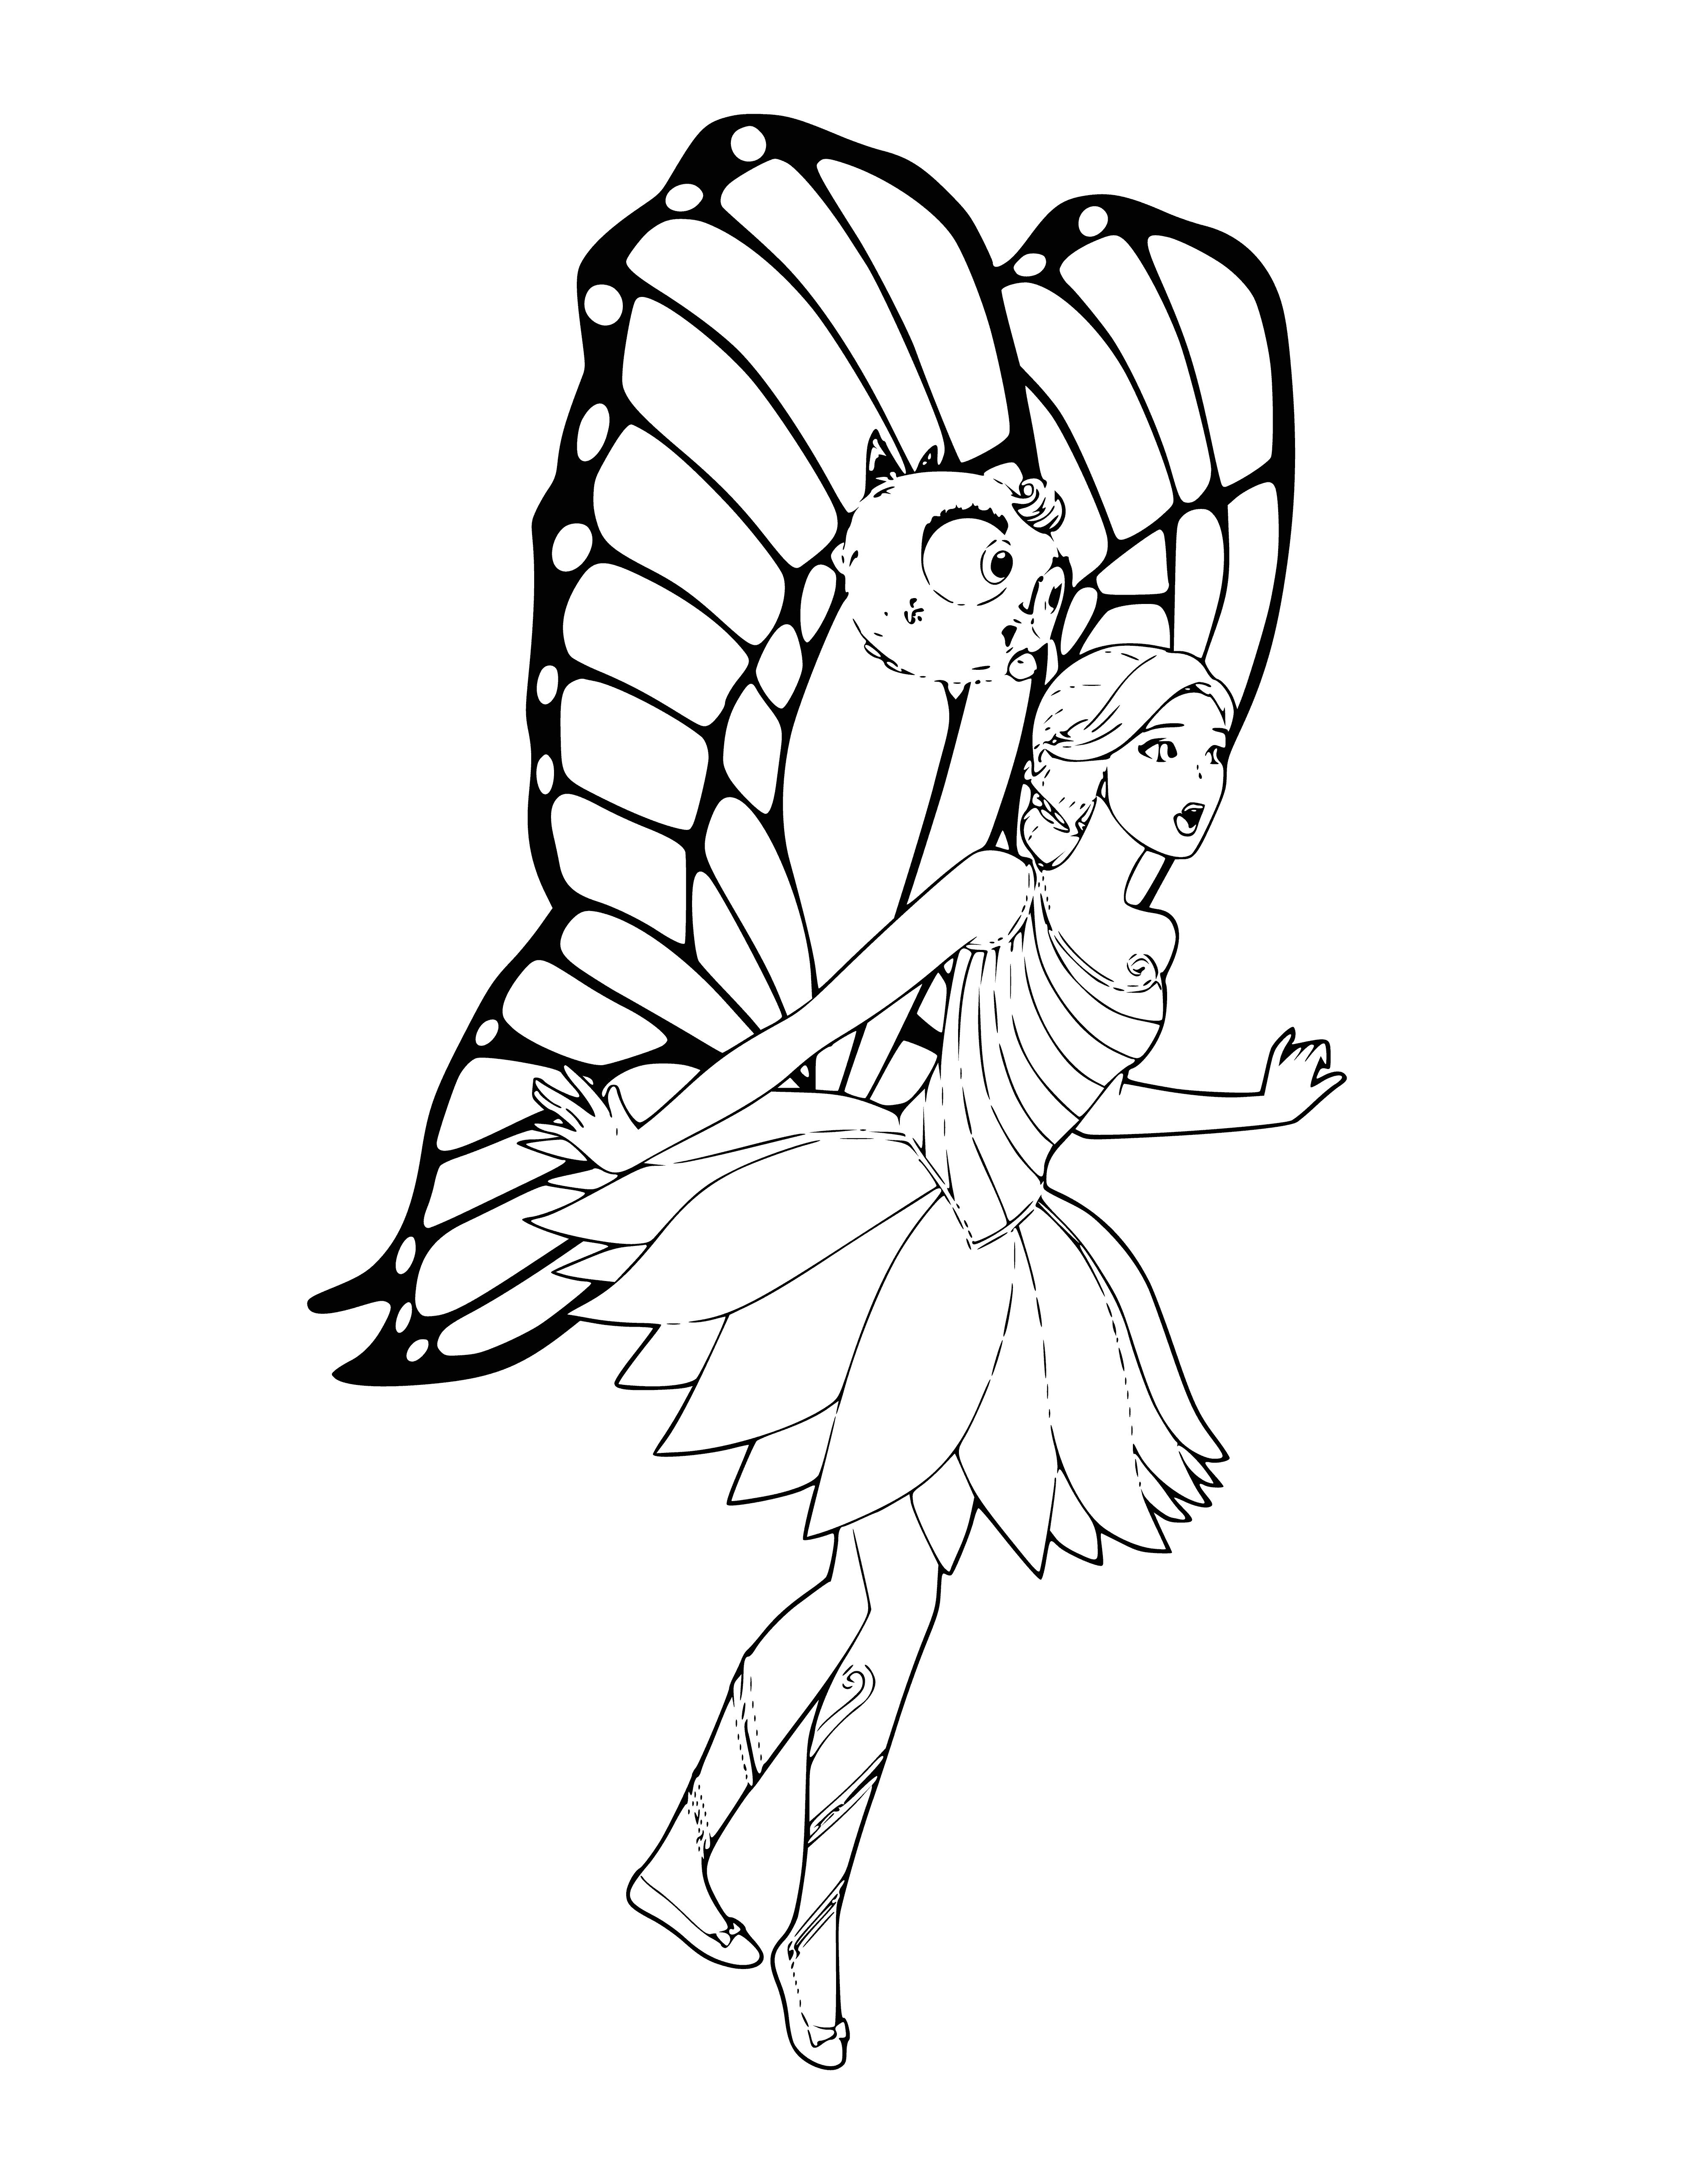 Fairy butterfly coloring page